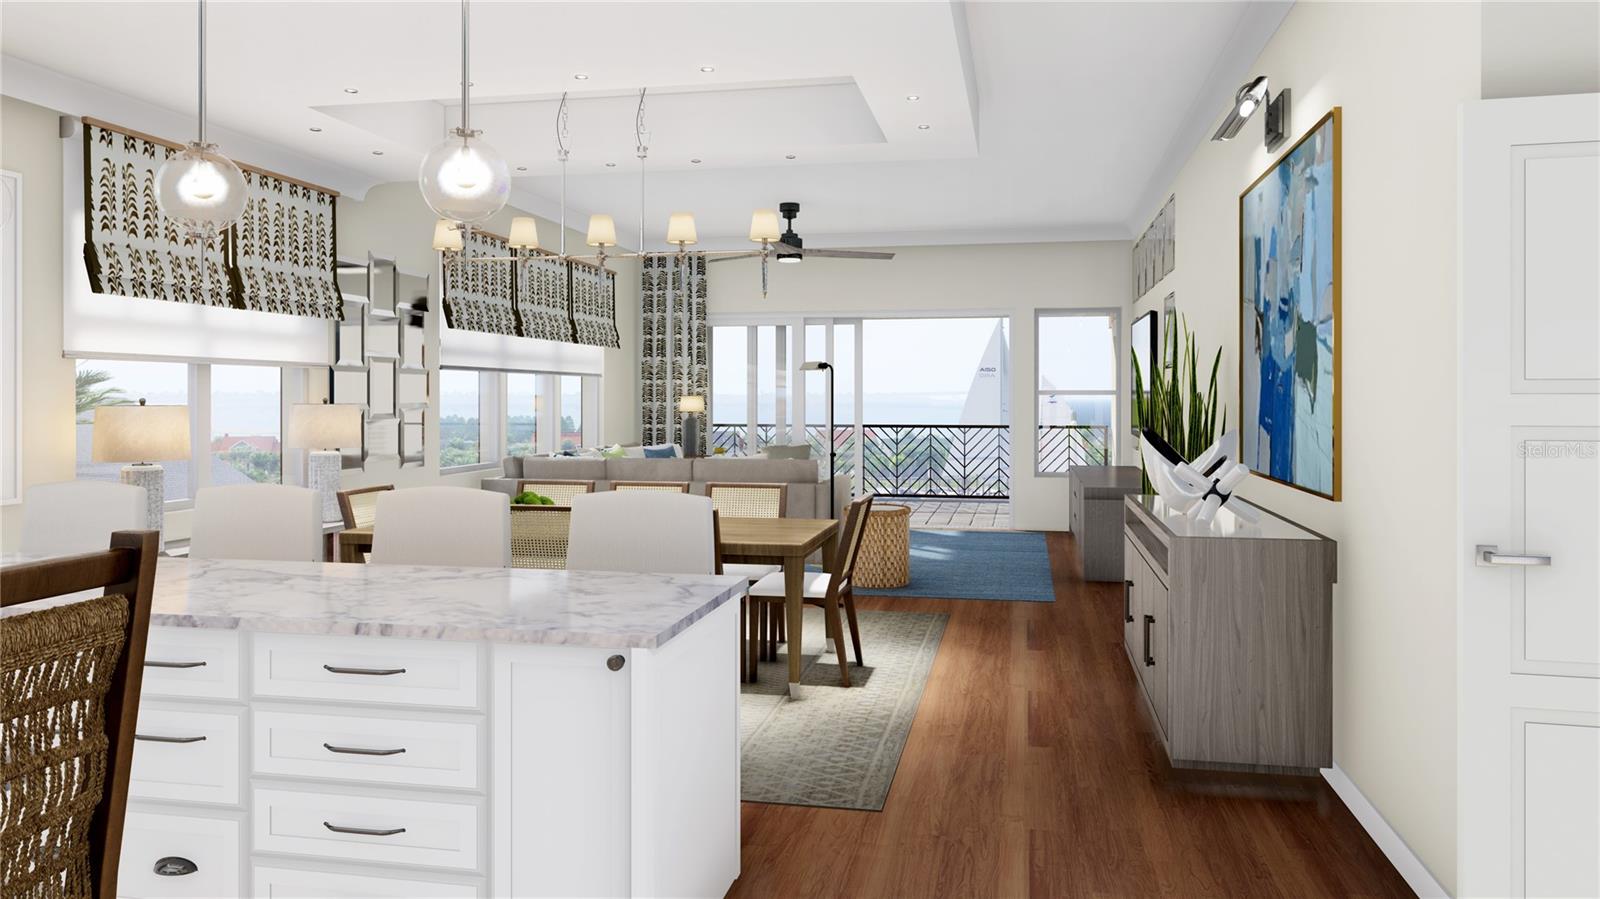 The kitchen overlooks the dining/living room and out to the balcony overlooking the water. Digital rendering.